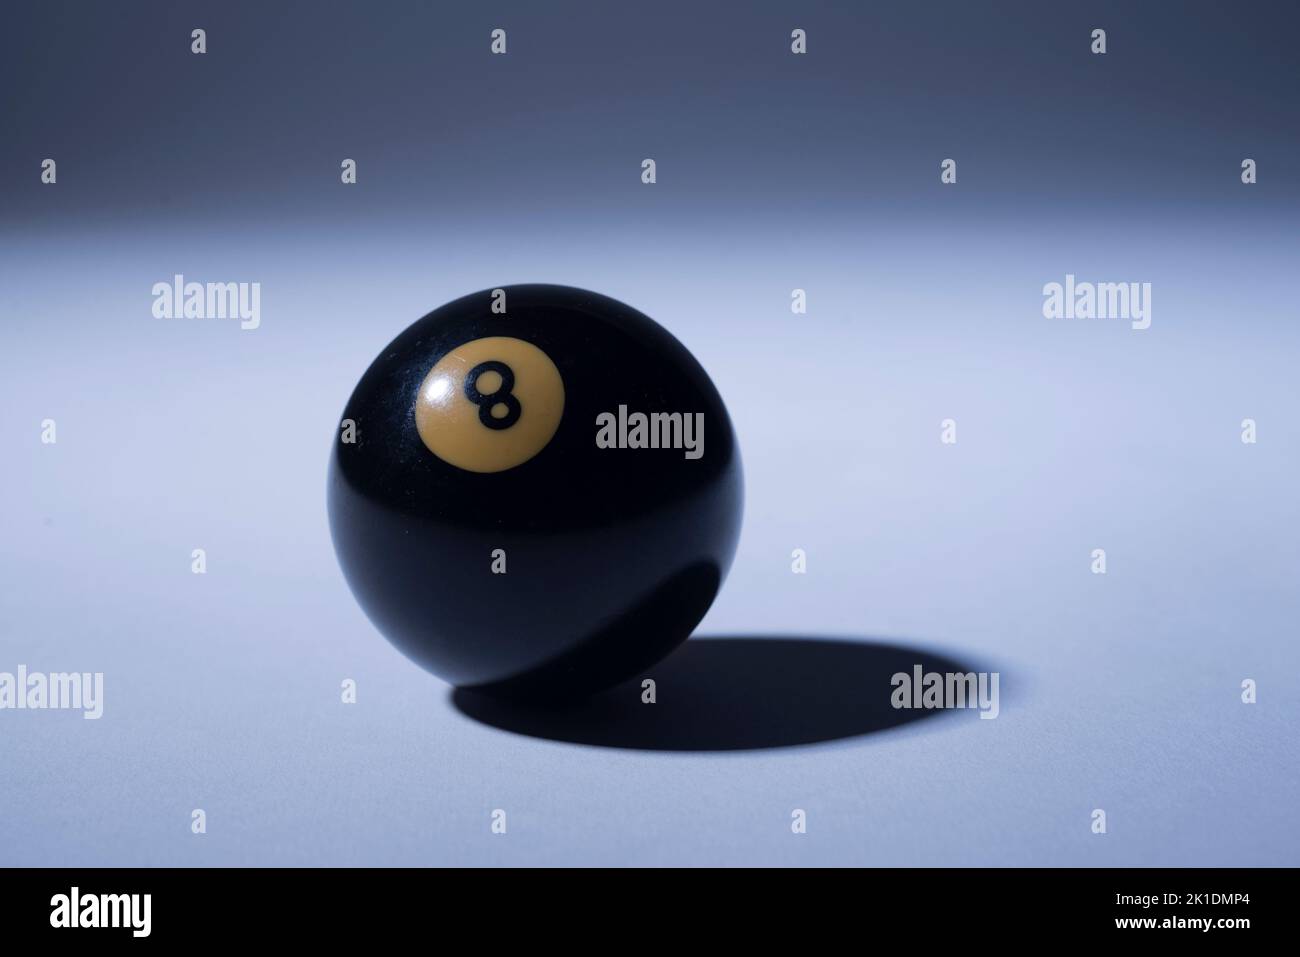 Eight ball symbol for success closeup on eightball with light reflections Stock Photo